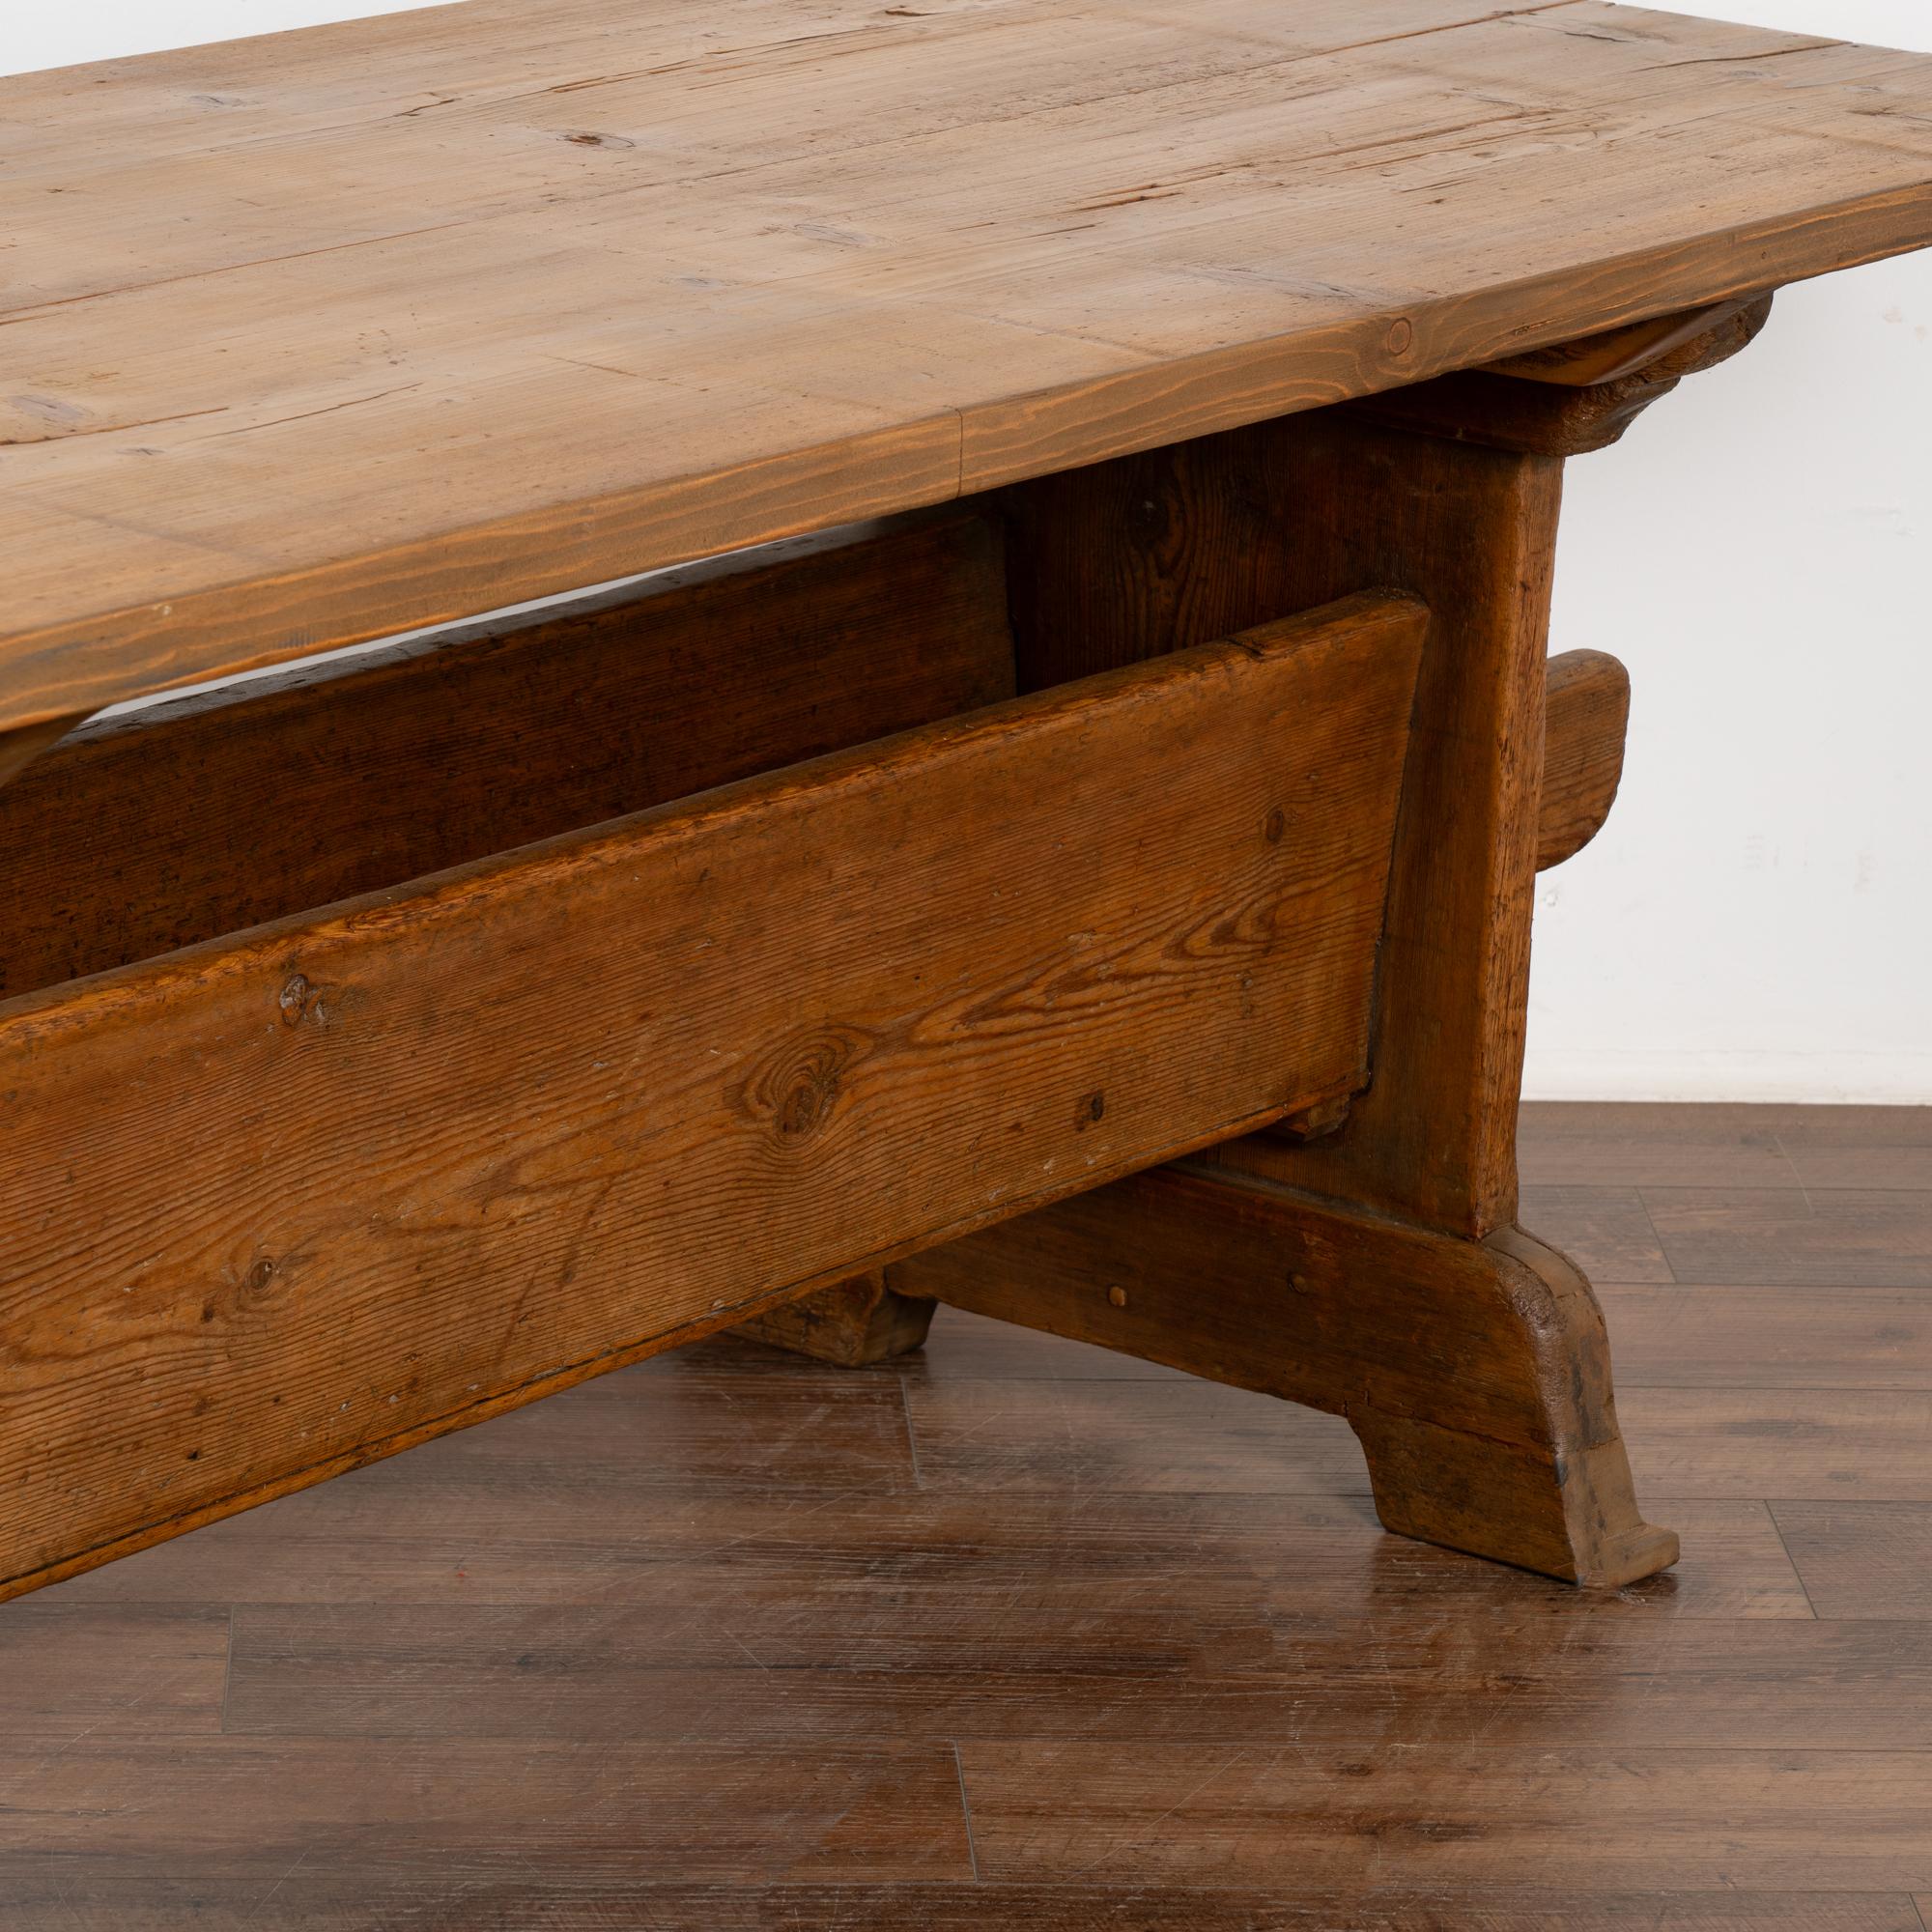 19th Century Antique Pine Farm Kitchen Dining Table, Sweden circa 1800-20 For Sale